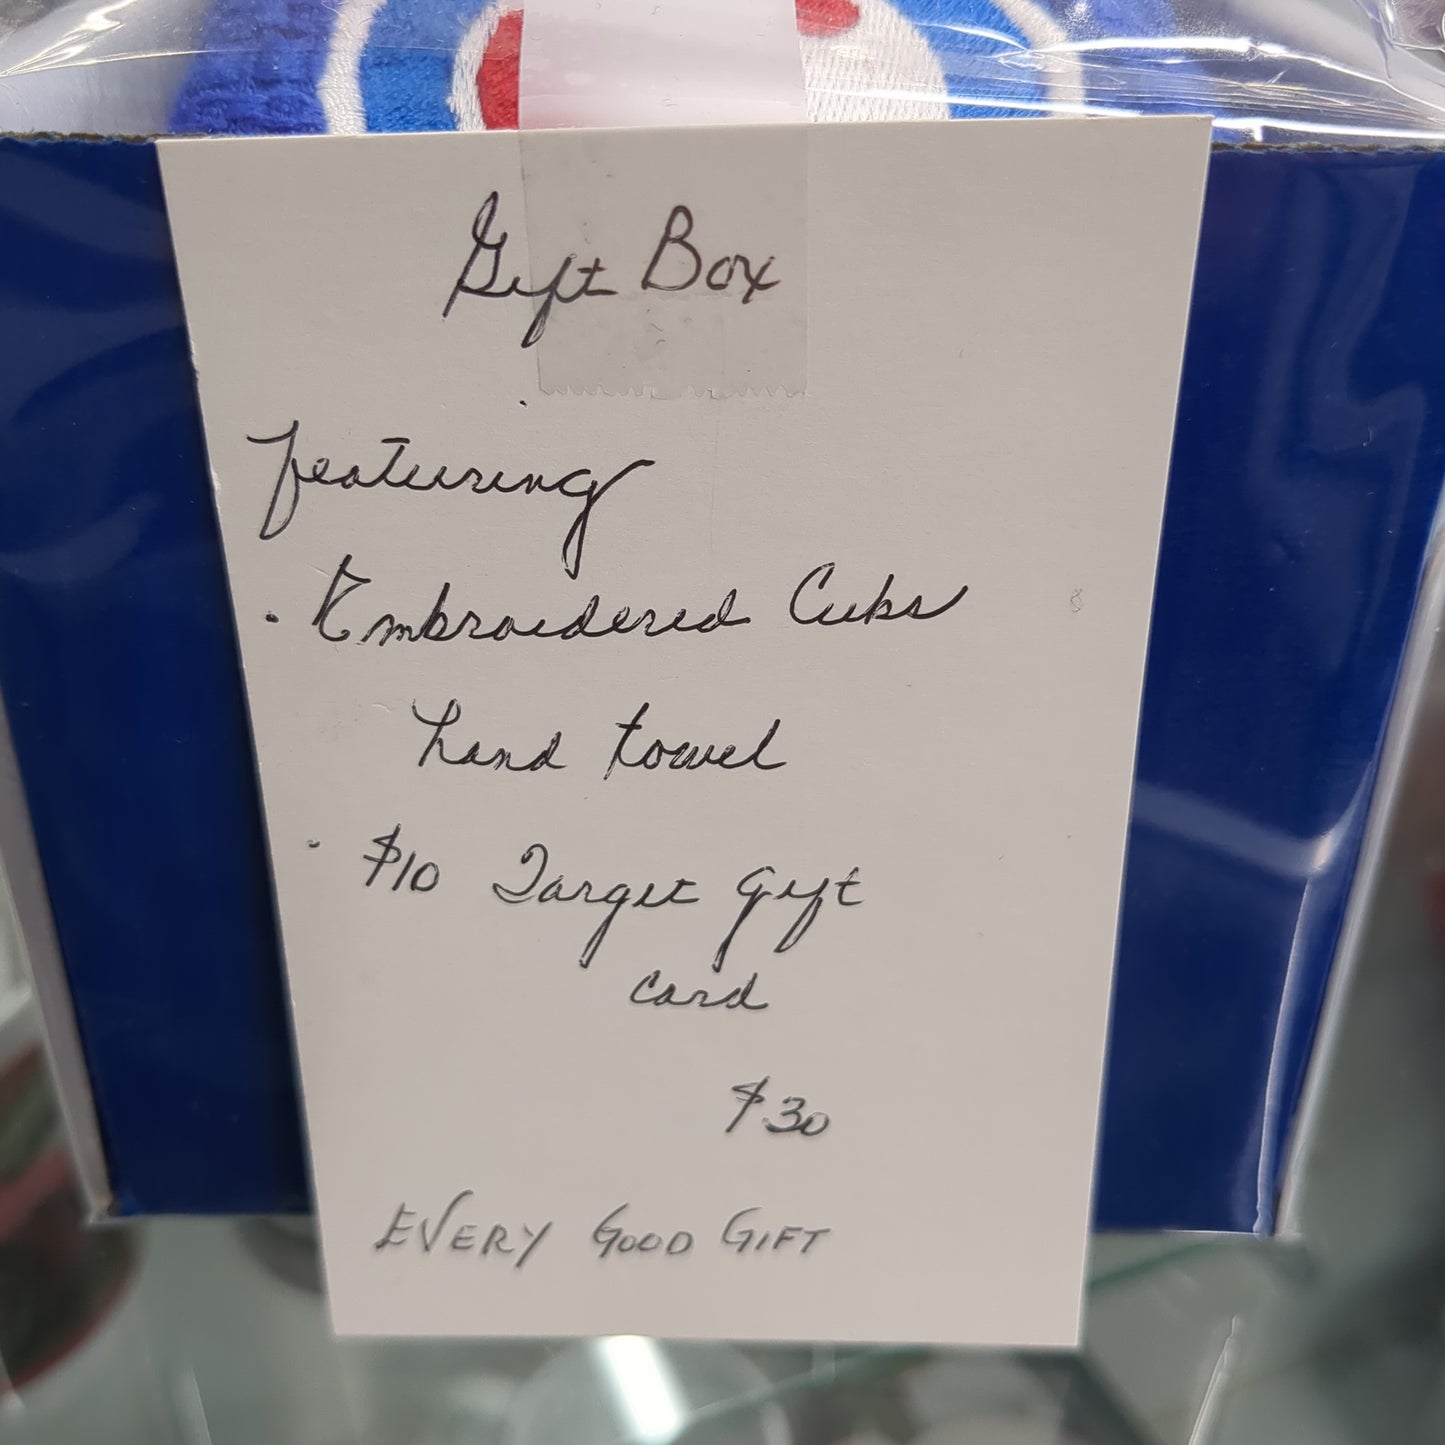 Gift Box: Embroidered Cubs Hand Towel with Target Gift Card